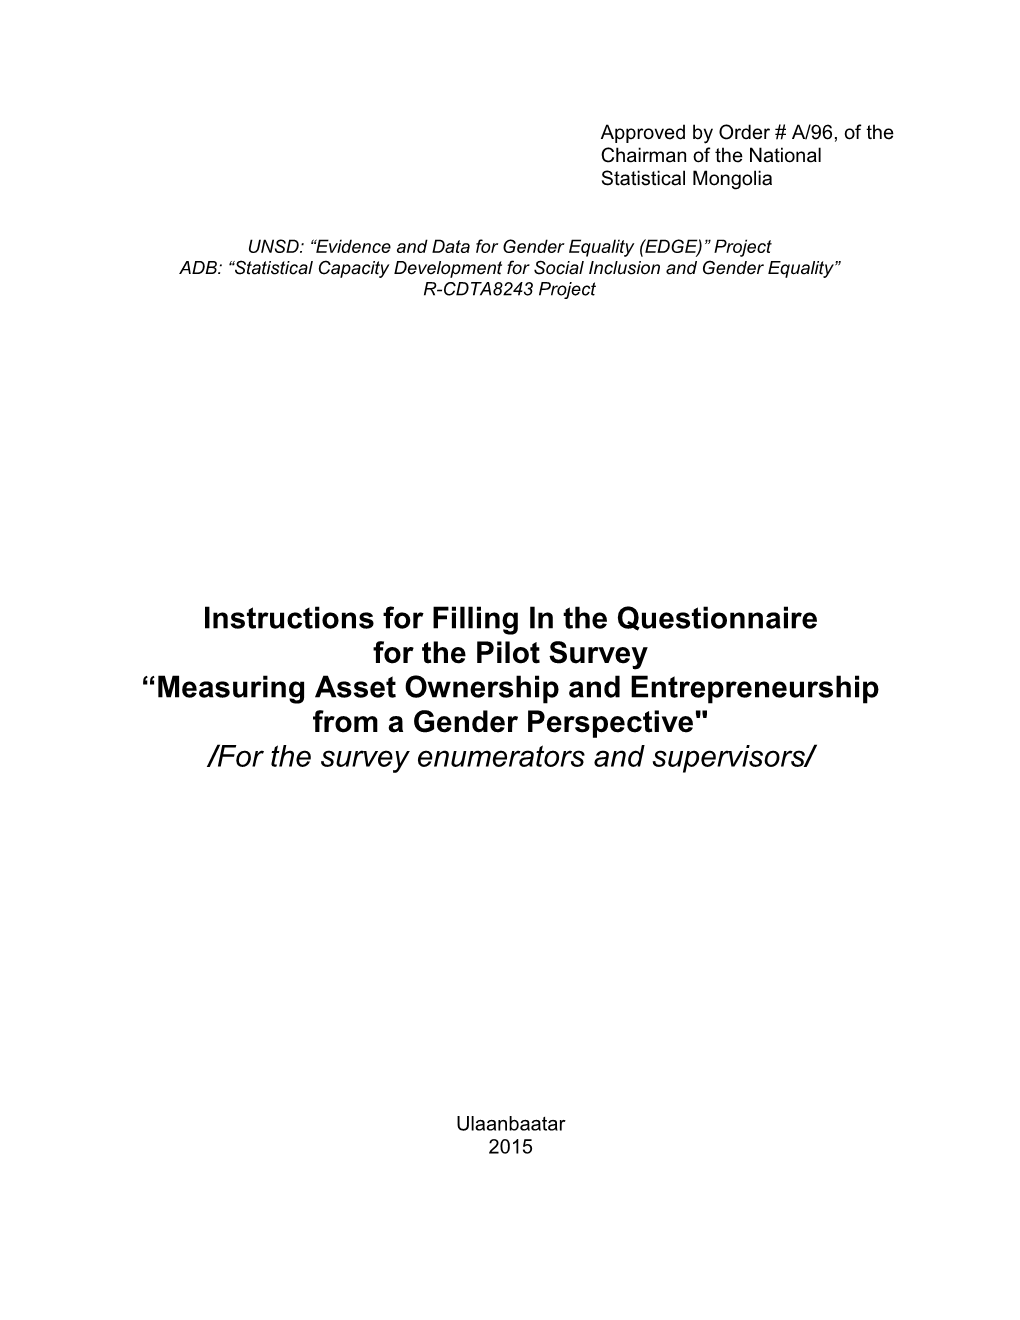 Instructions for Filling in the Questionnaire for the Pilot Survey